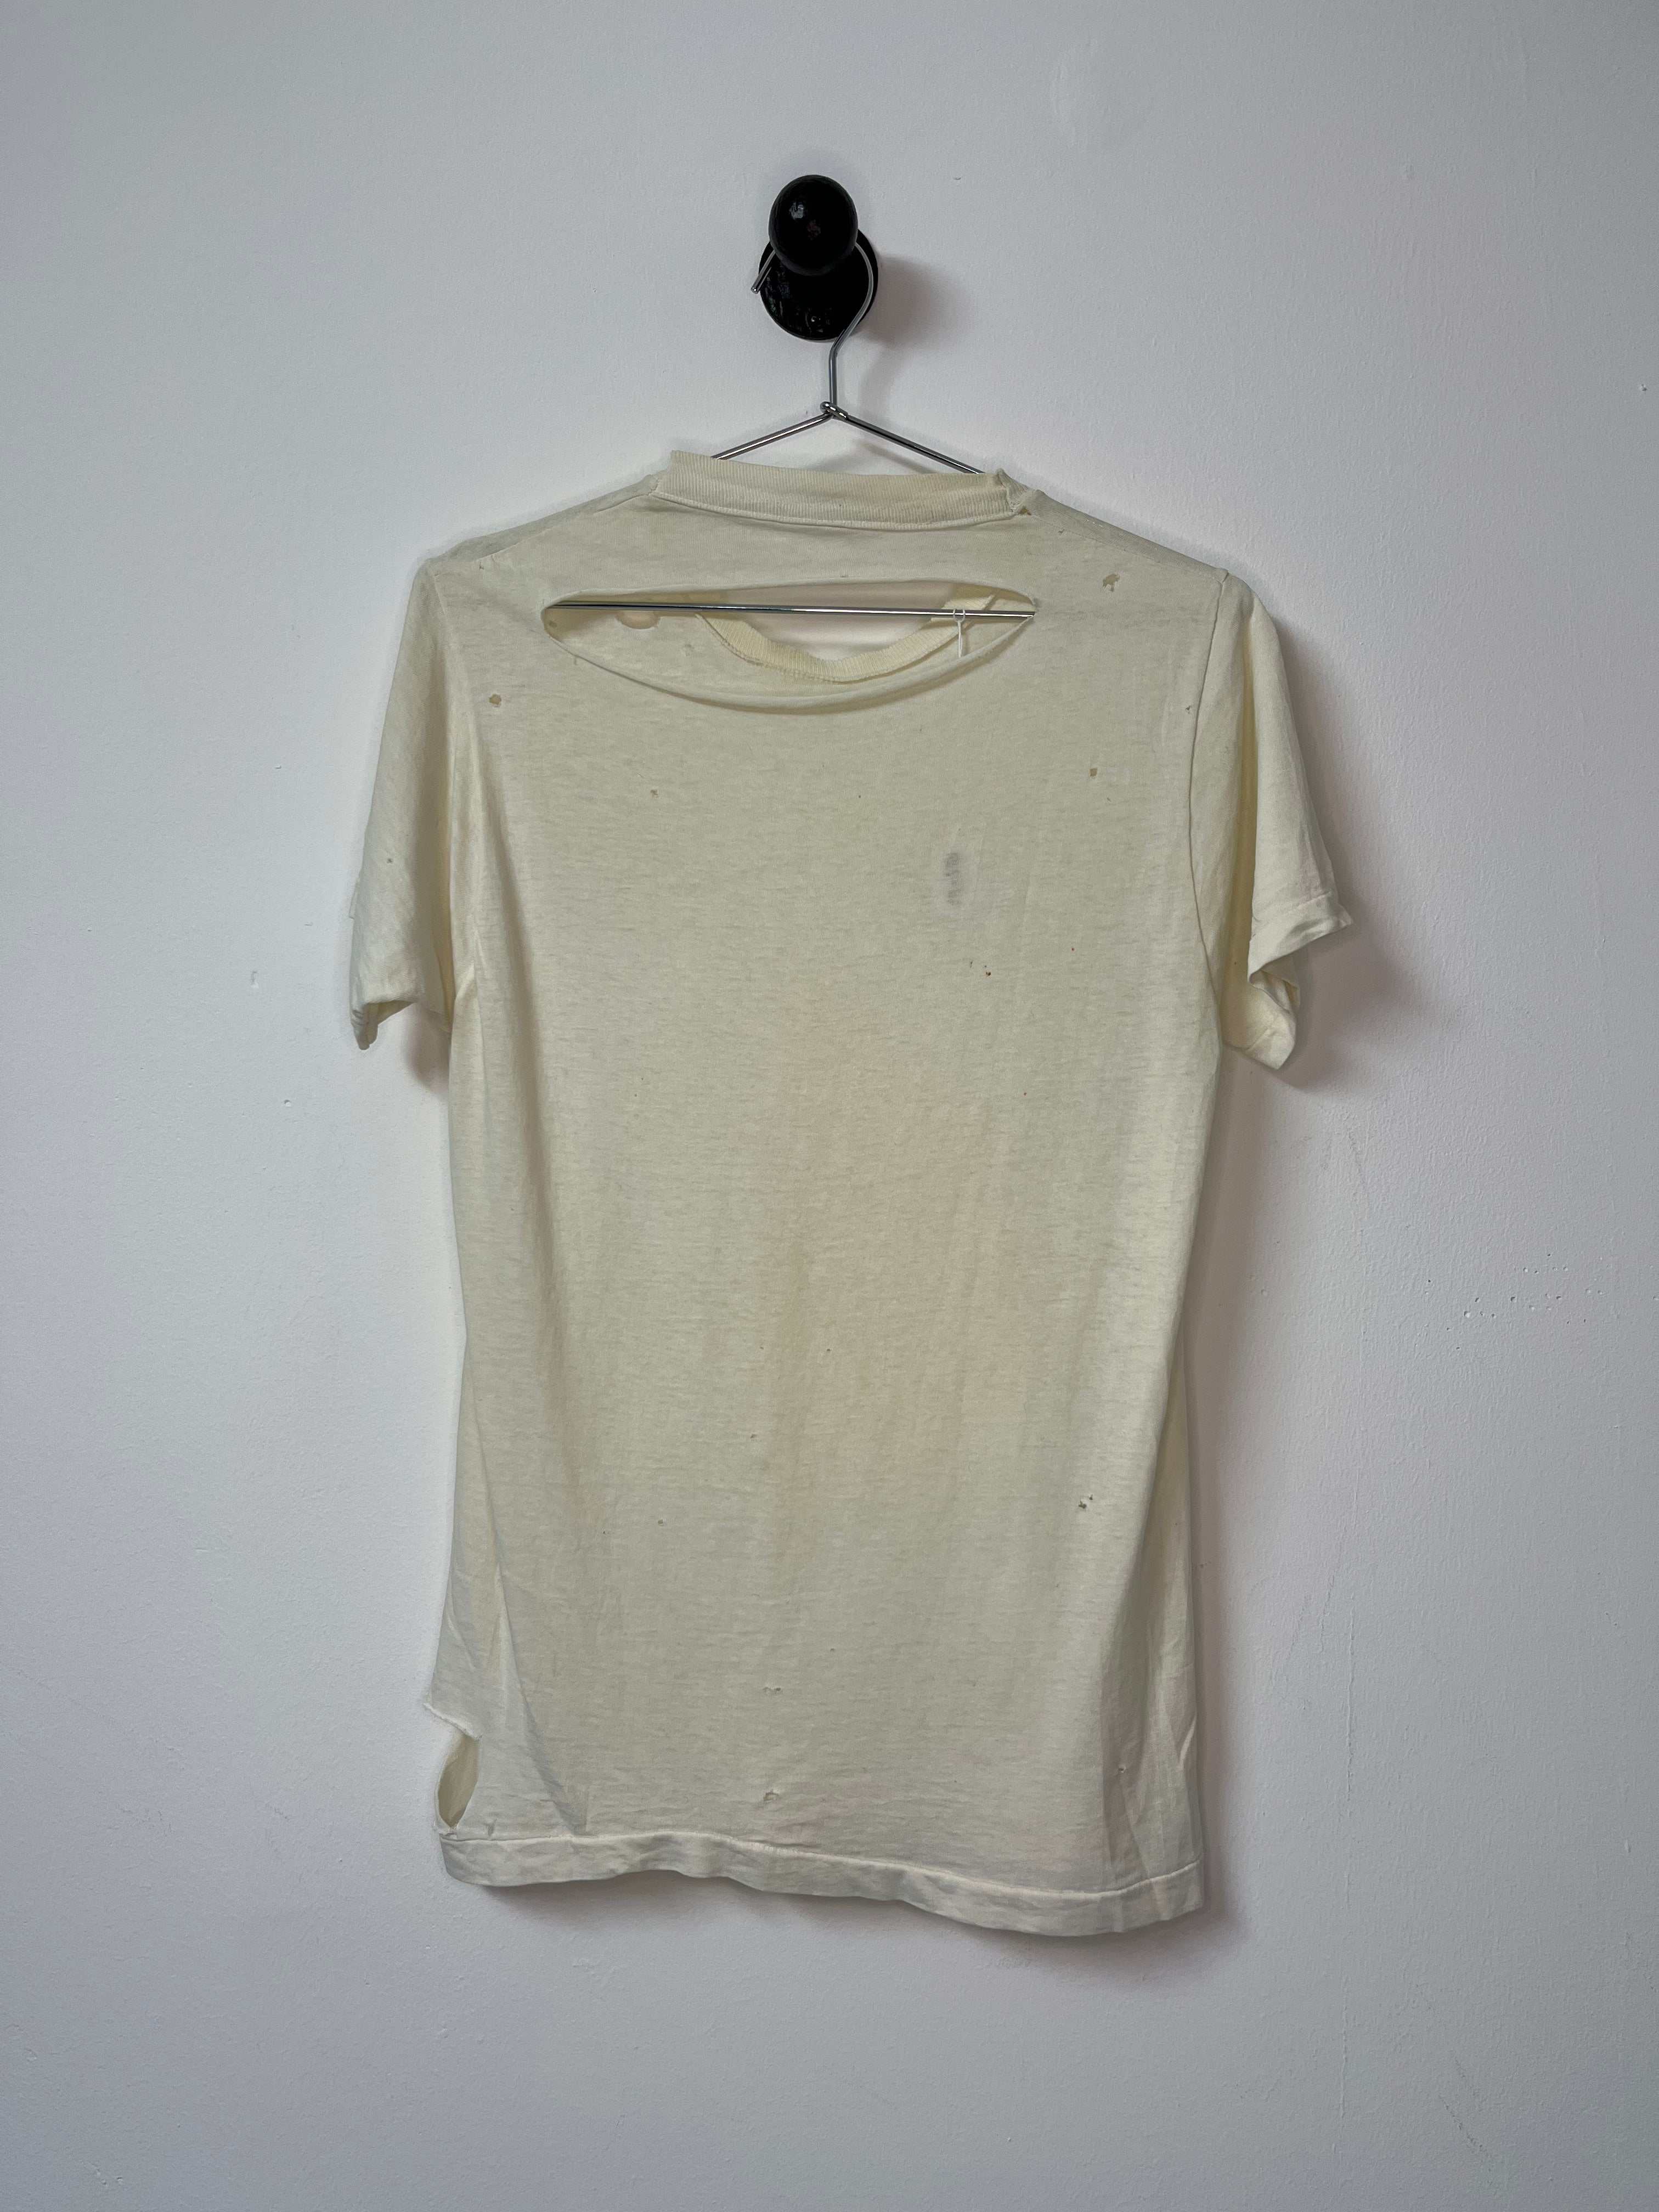 60/70s Distressed Blank White Tee - Aged White - M/L